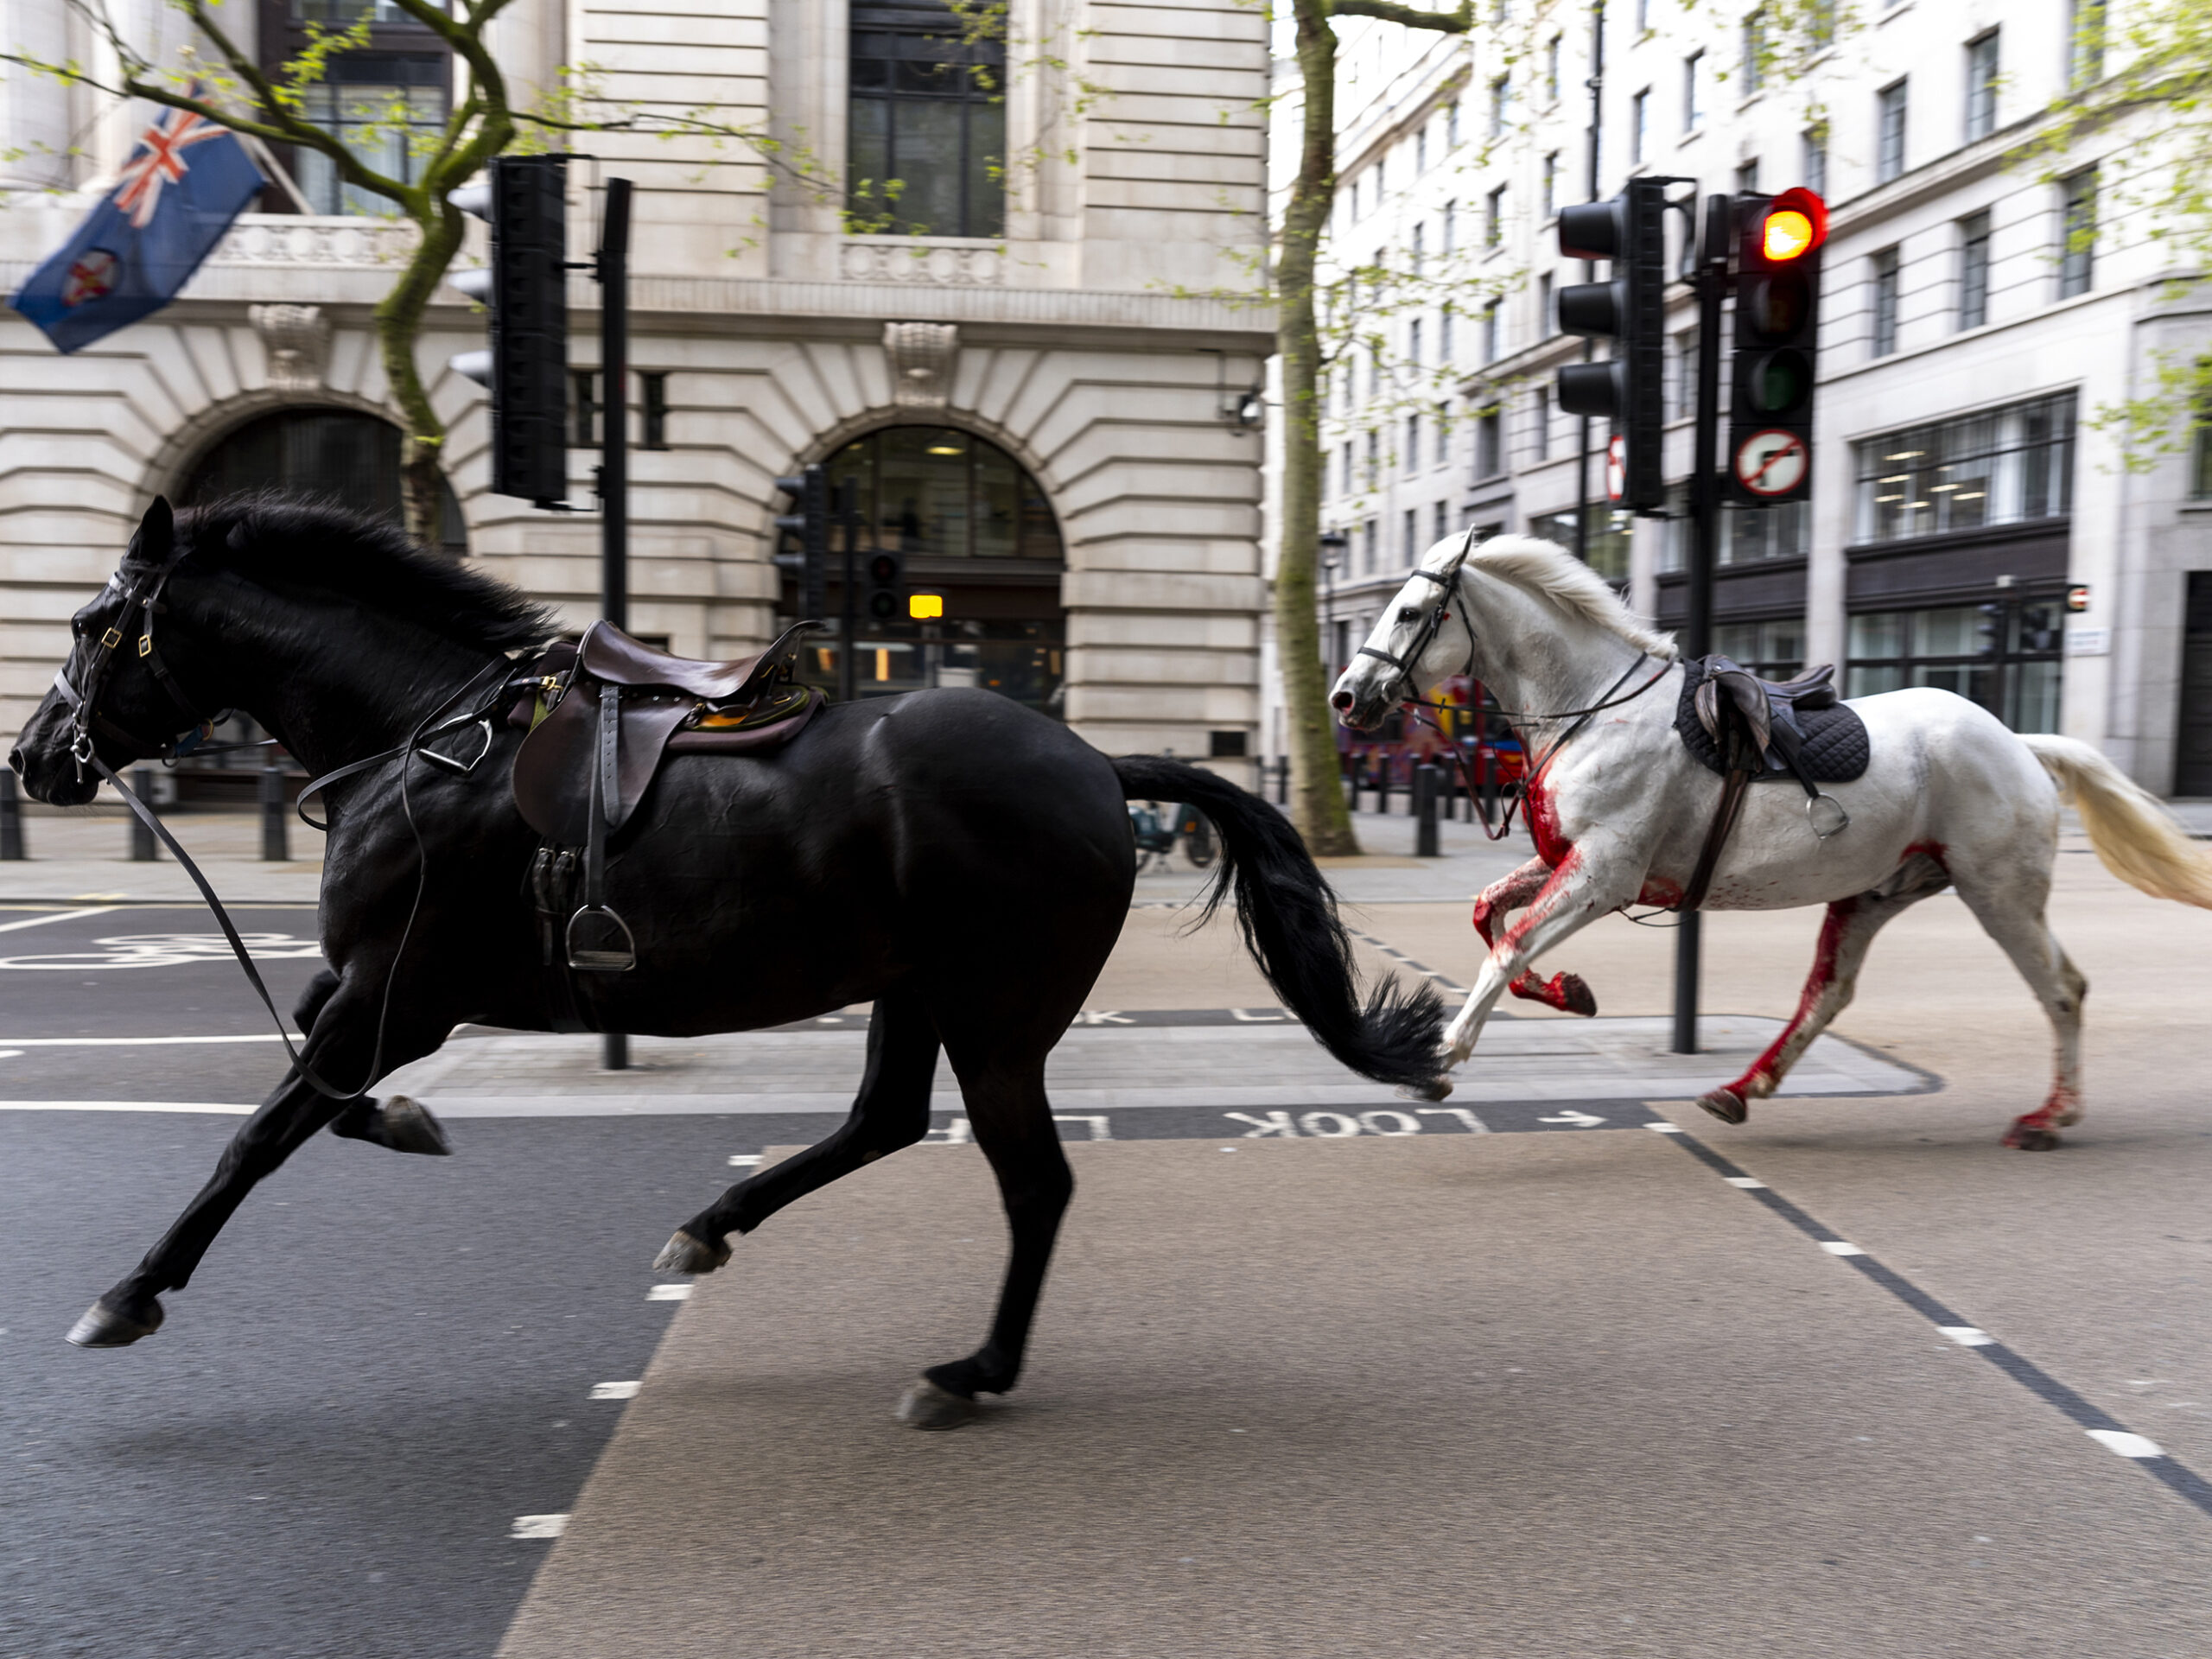 Two horses bolt through the streets of London near Aldwych on Wednesday.